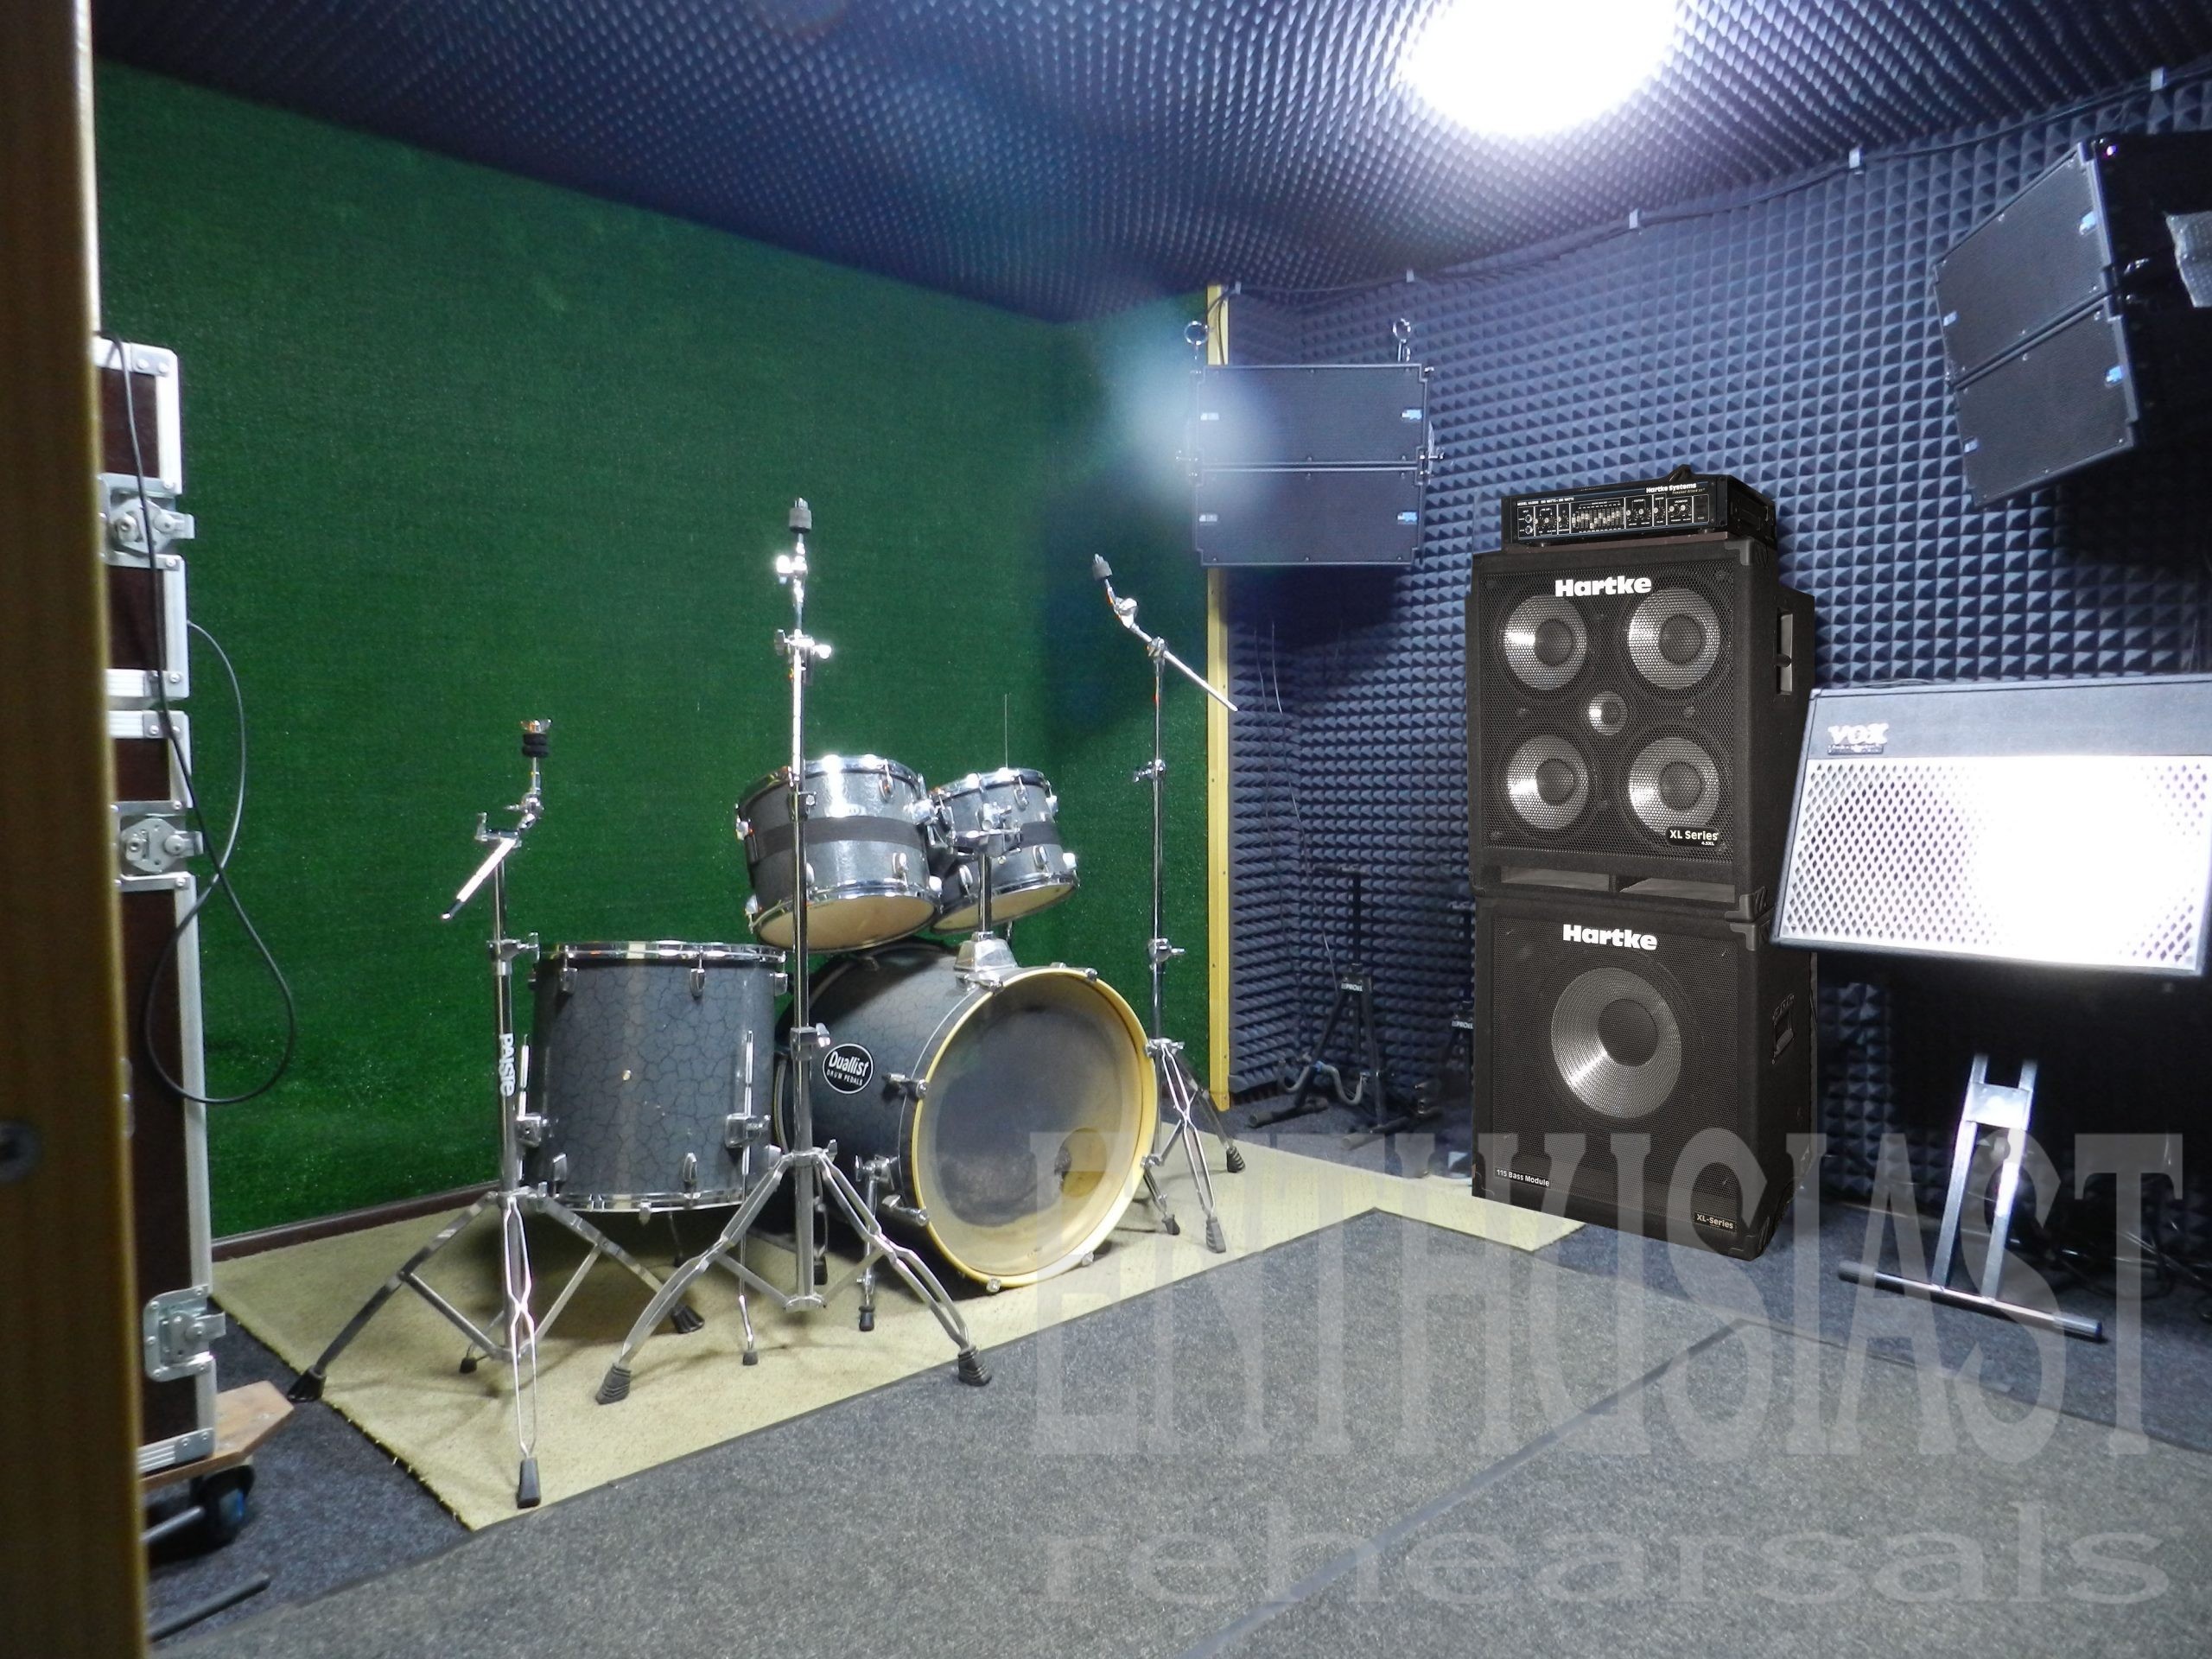 Rehearsal base & studio ENTHUSIAST in Moscow, RUSSIA